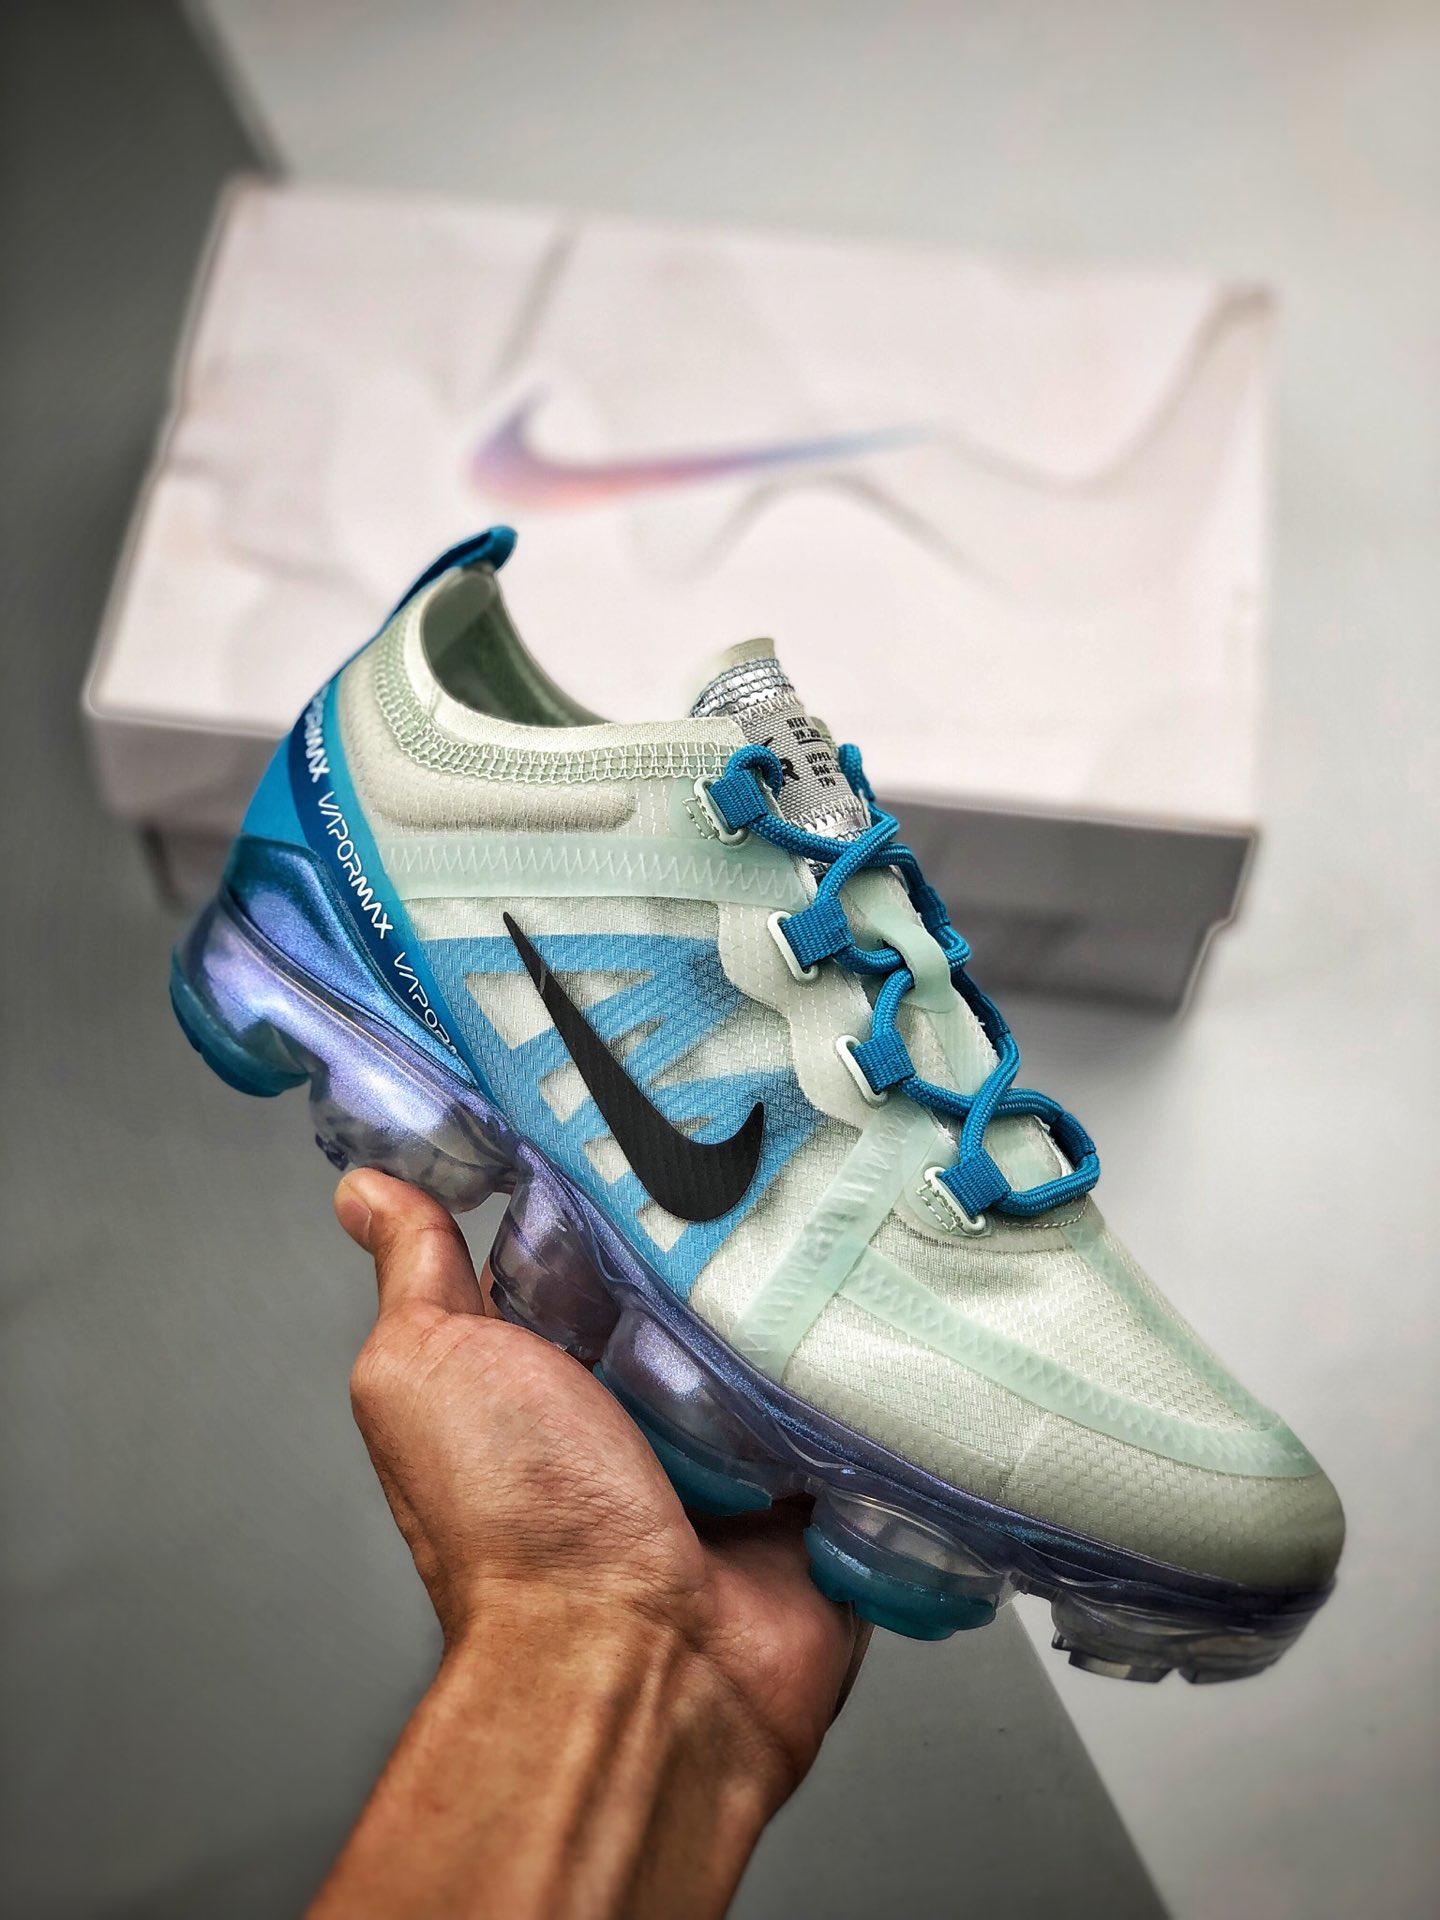 Nike WMNS Air VaporMax 2019 Barely Grey/Black On Sale – Sneaker Hello